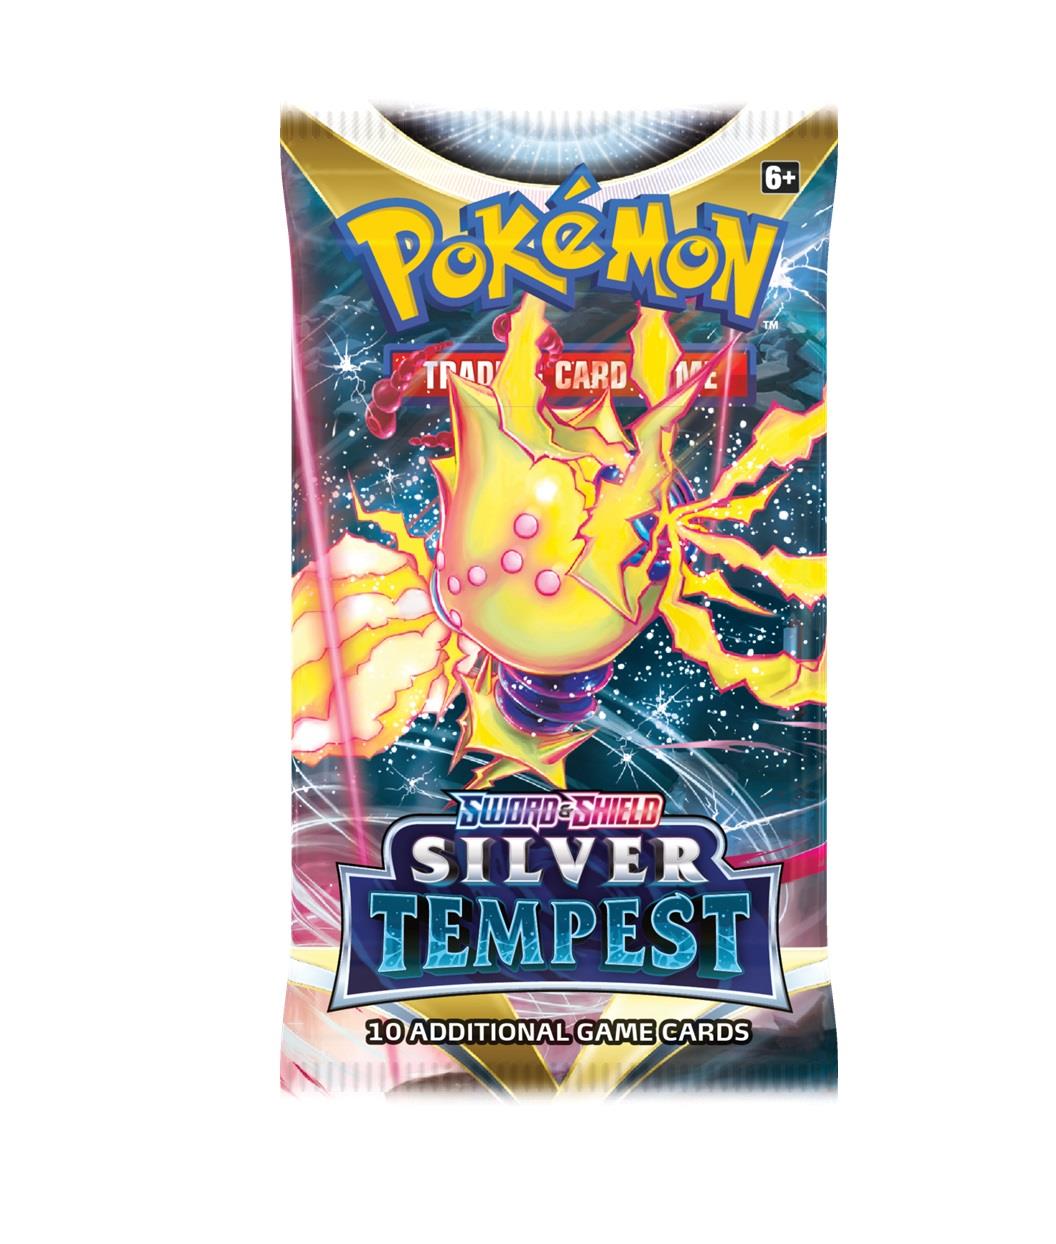 Pokémon TCG booster Sword & Shield Silver Tempest Boosterpack